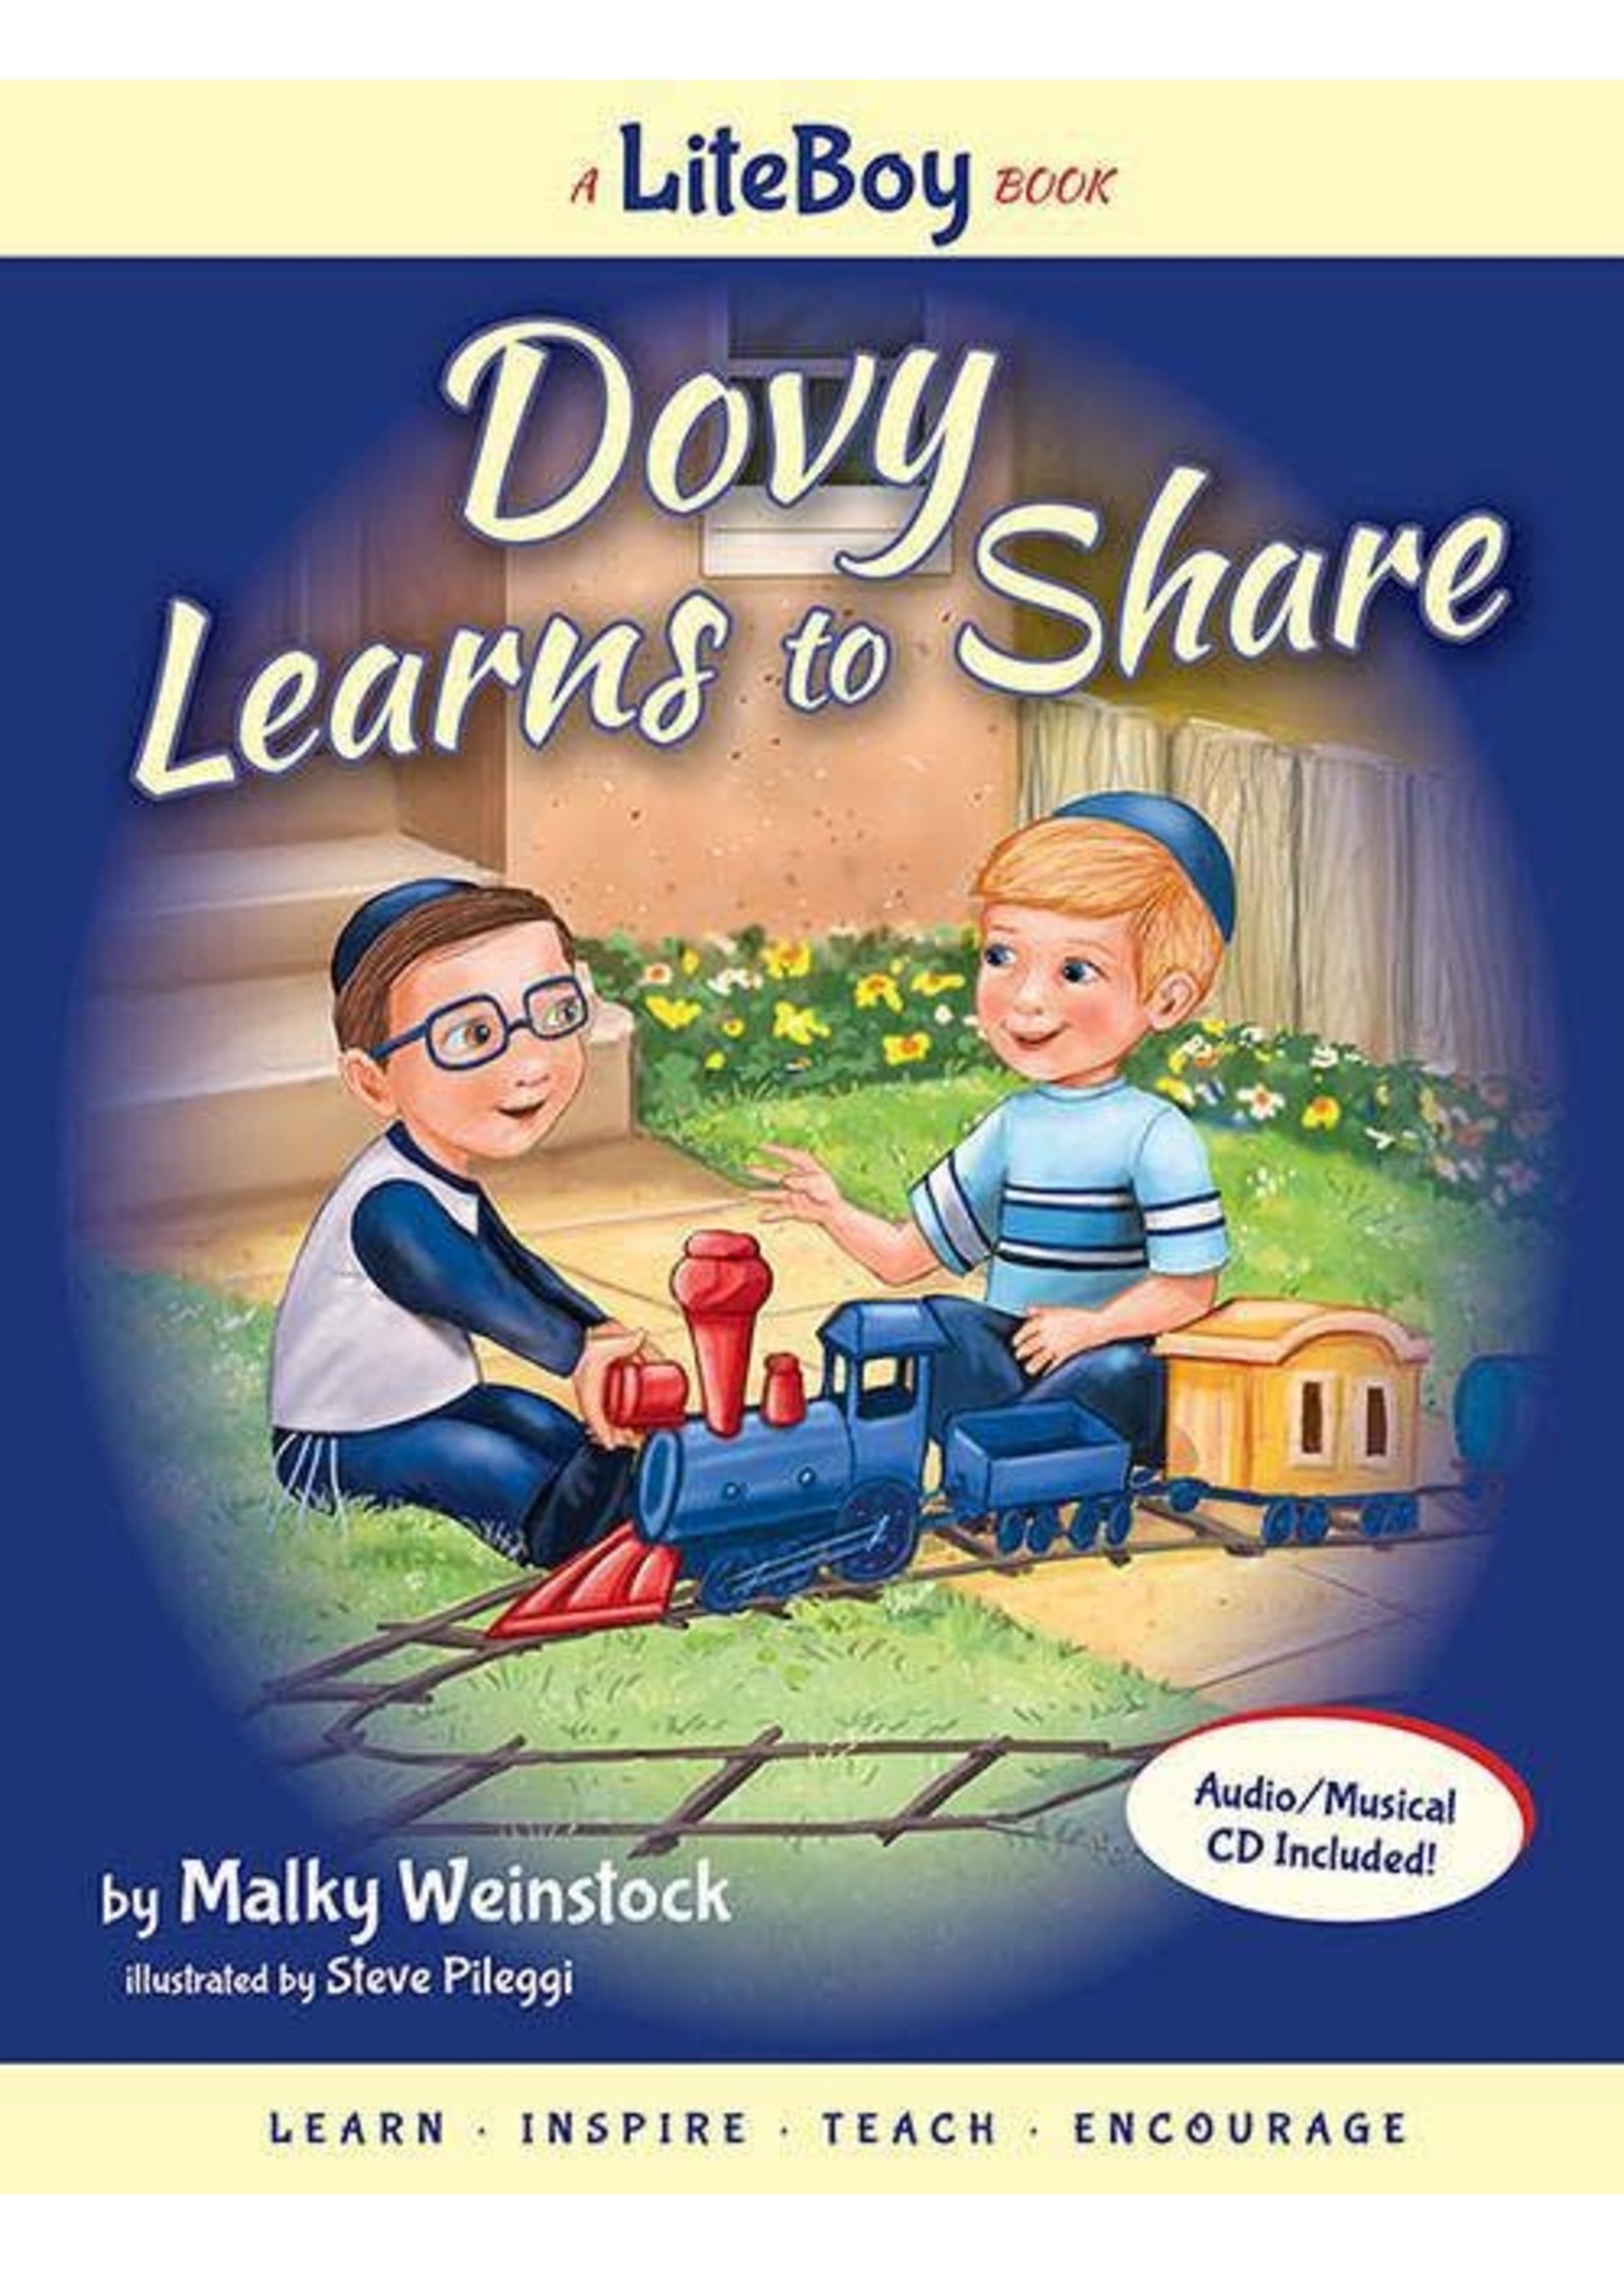 DOVY LEARNS HOW TO SHARE